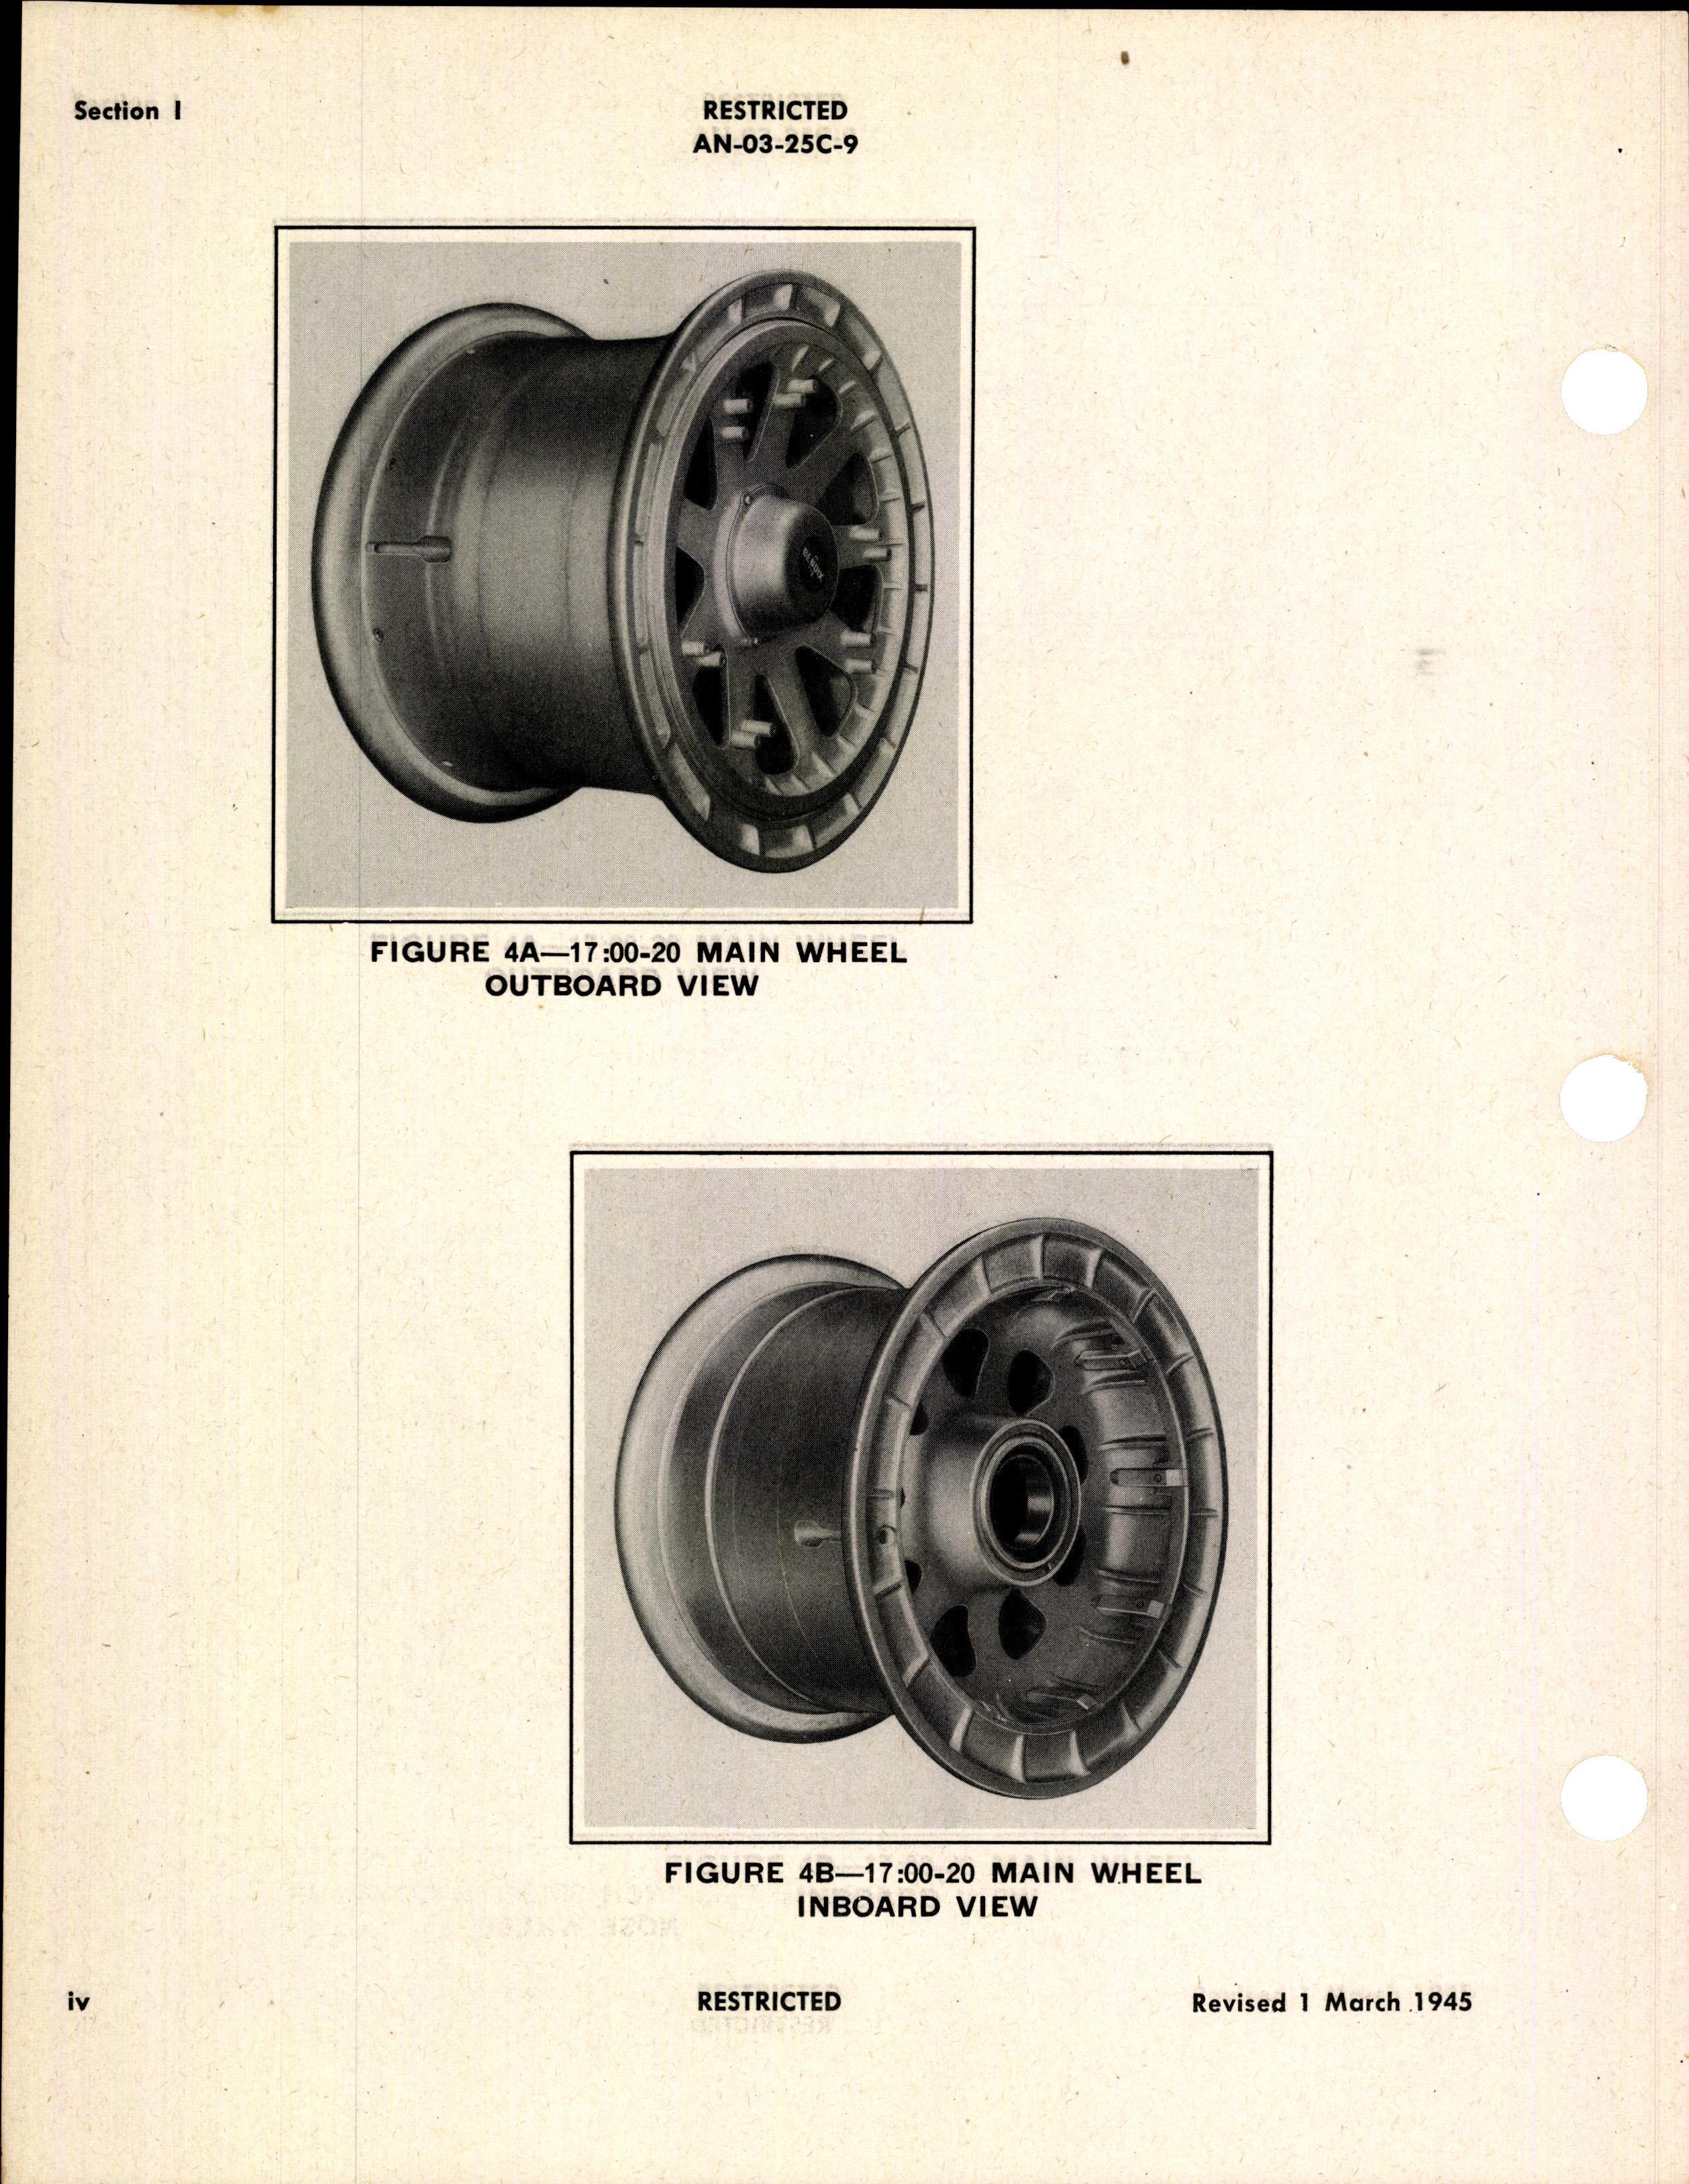 Sample page 6 from AirCorps Library document: Handbook of Instructions with Parts Catalog for Bendix Wheels